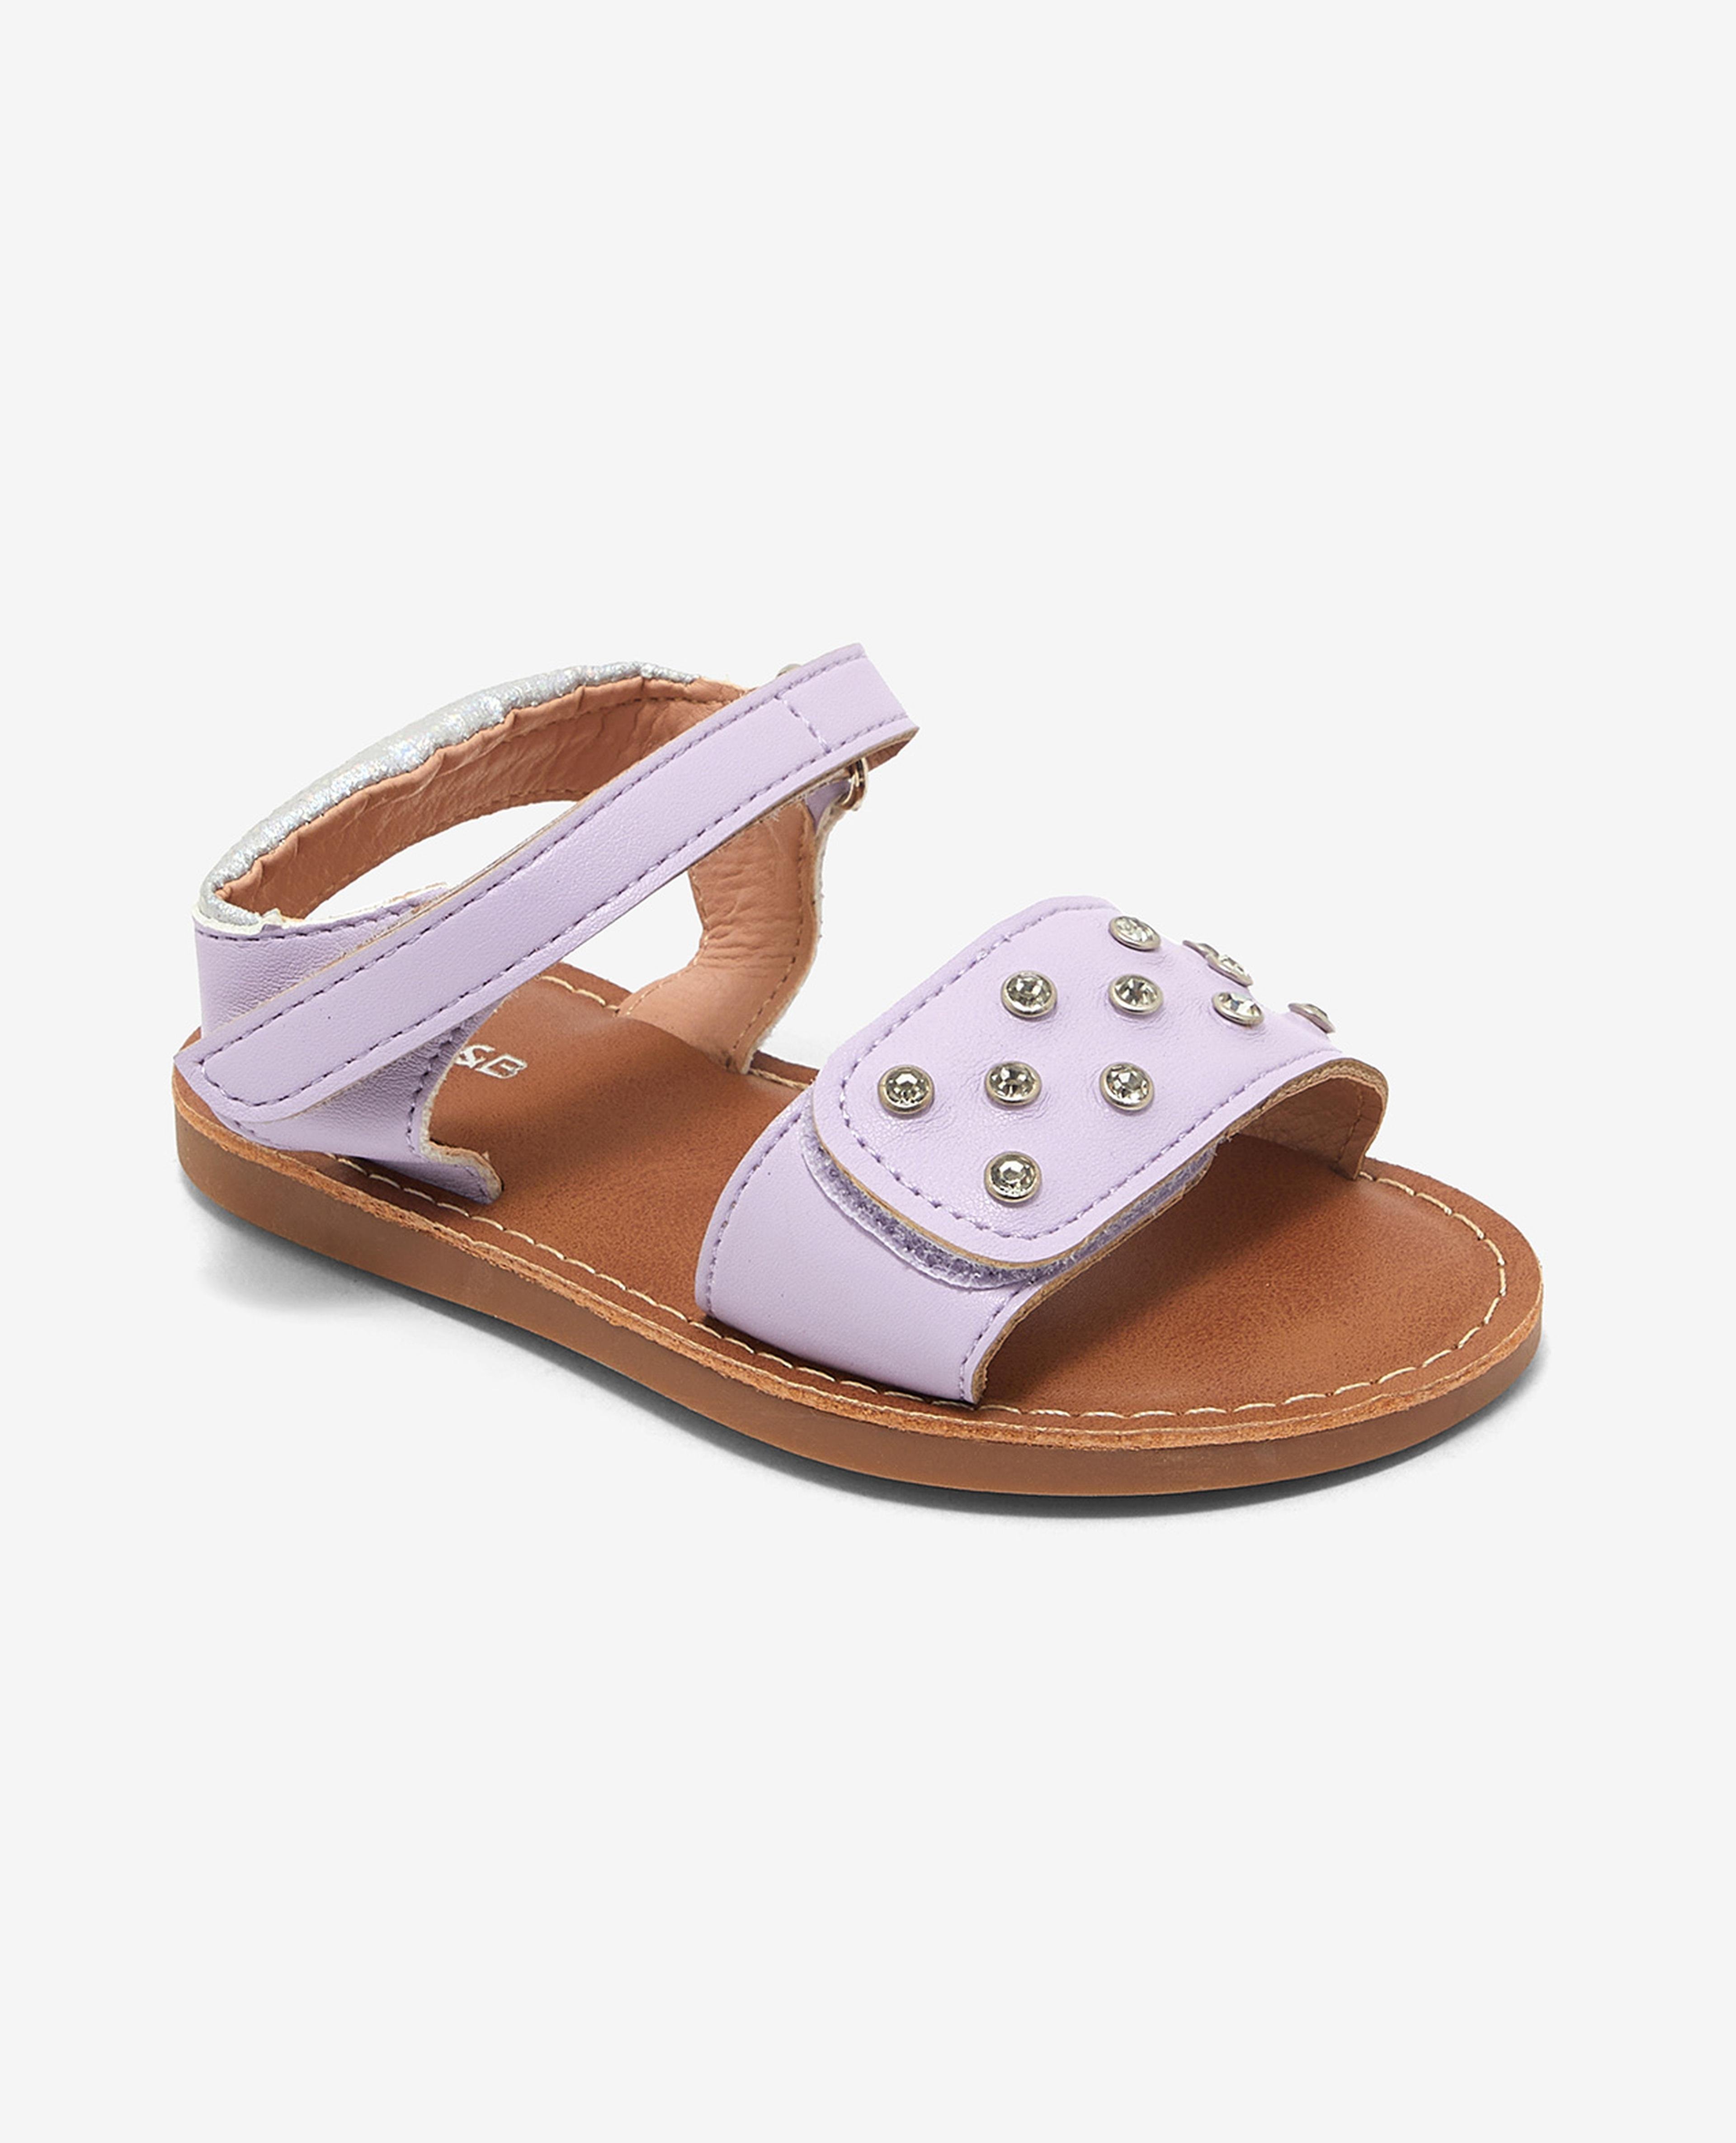 Embellished Open-Toe Sandals with Velcro Closure